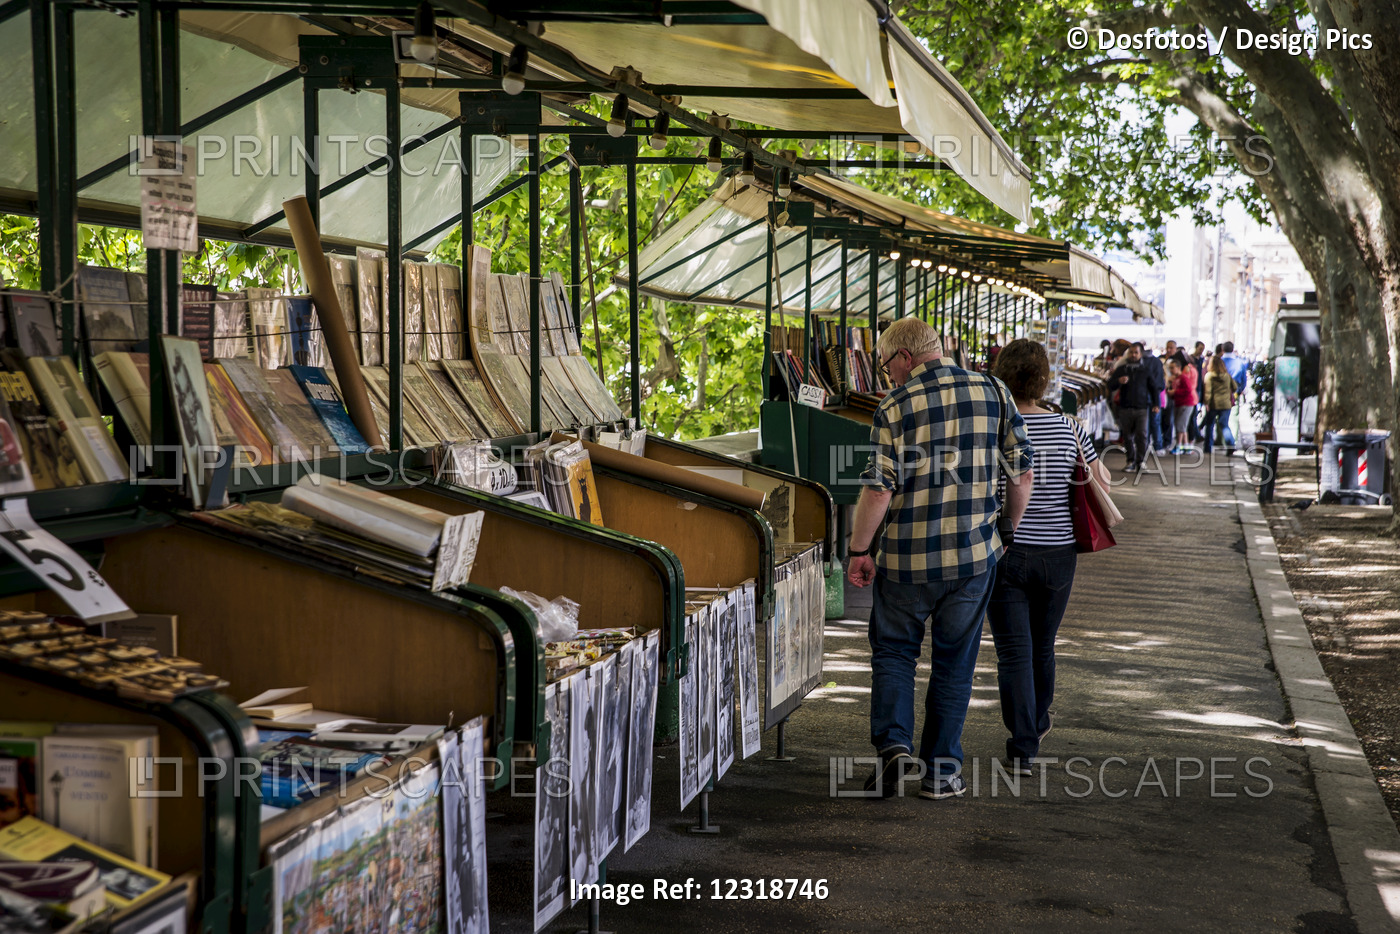 Tourists At A Prints Market; Rome, Italy